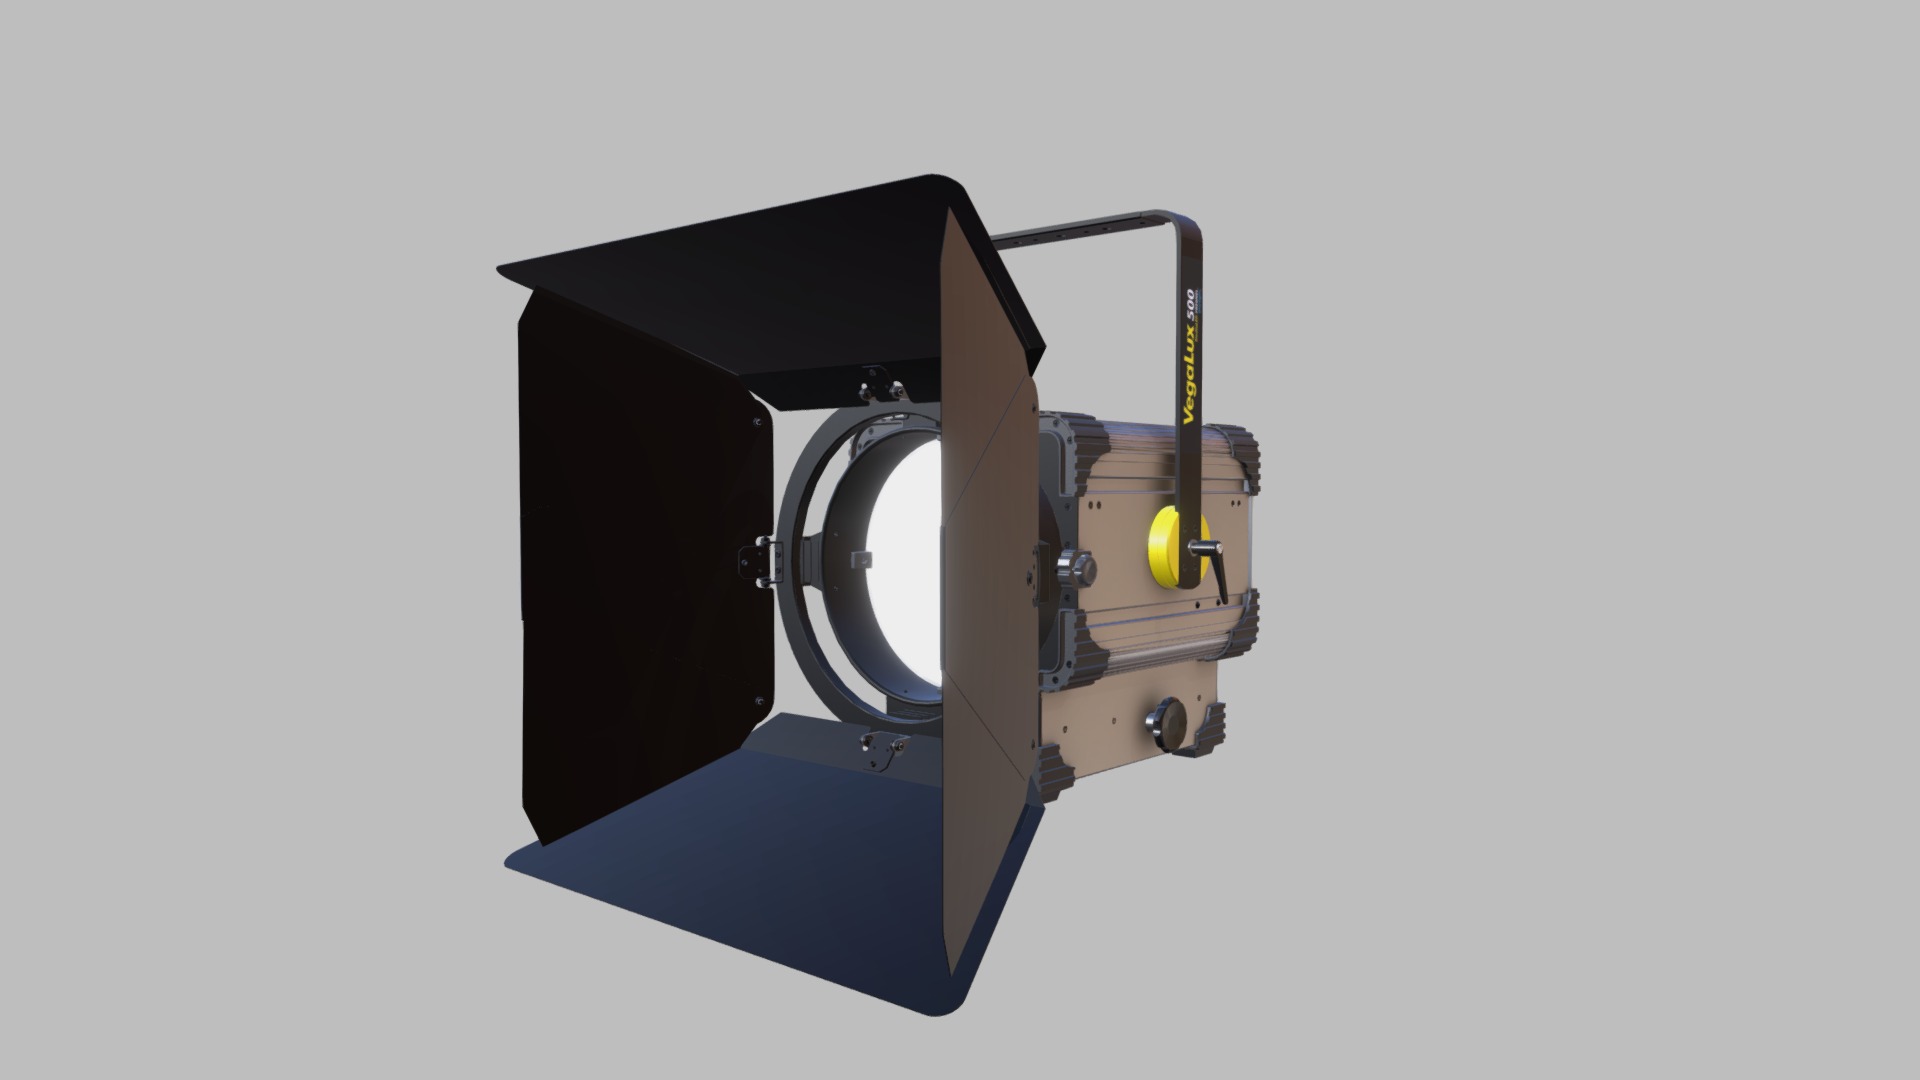 VEGALUX 500 StudioLED FRESNEL Big 5K Daylight and Tungsten Models are available - VEGALUX 500 StudioLED FRESNEL Big 5K - 3D model by FLUOTEC 3d model